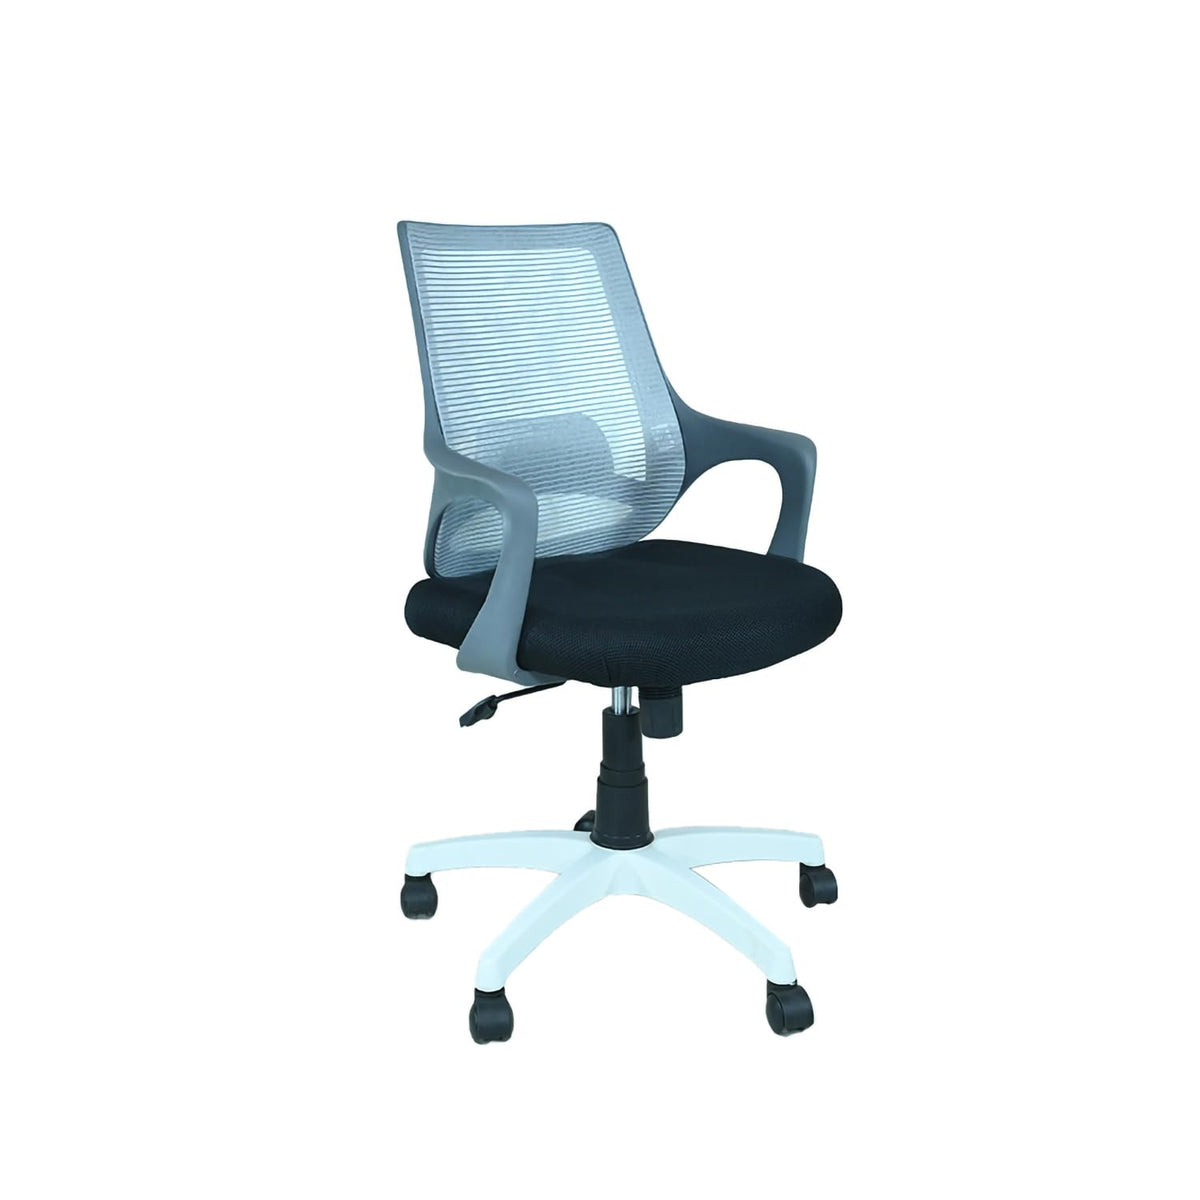 SmileSellers Pearl Mesh Mid-Back Ergonomic Office Chair | Study Chair | Revolving Chair | Computer Chair | Work from Home